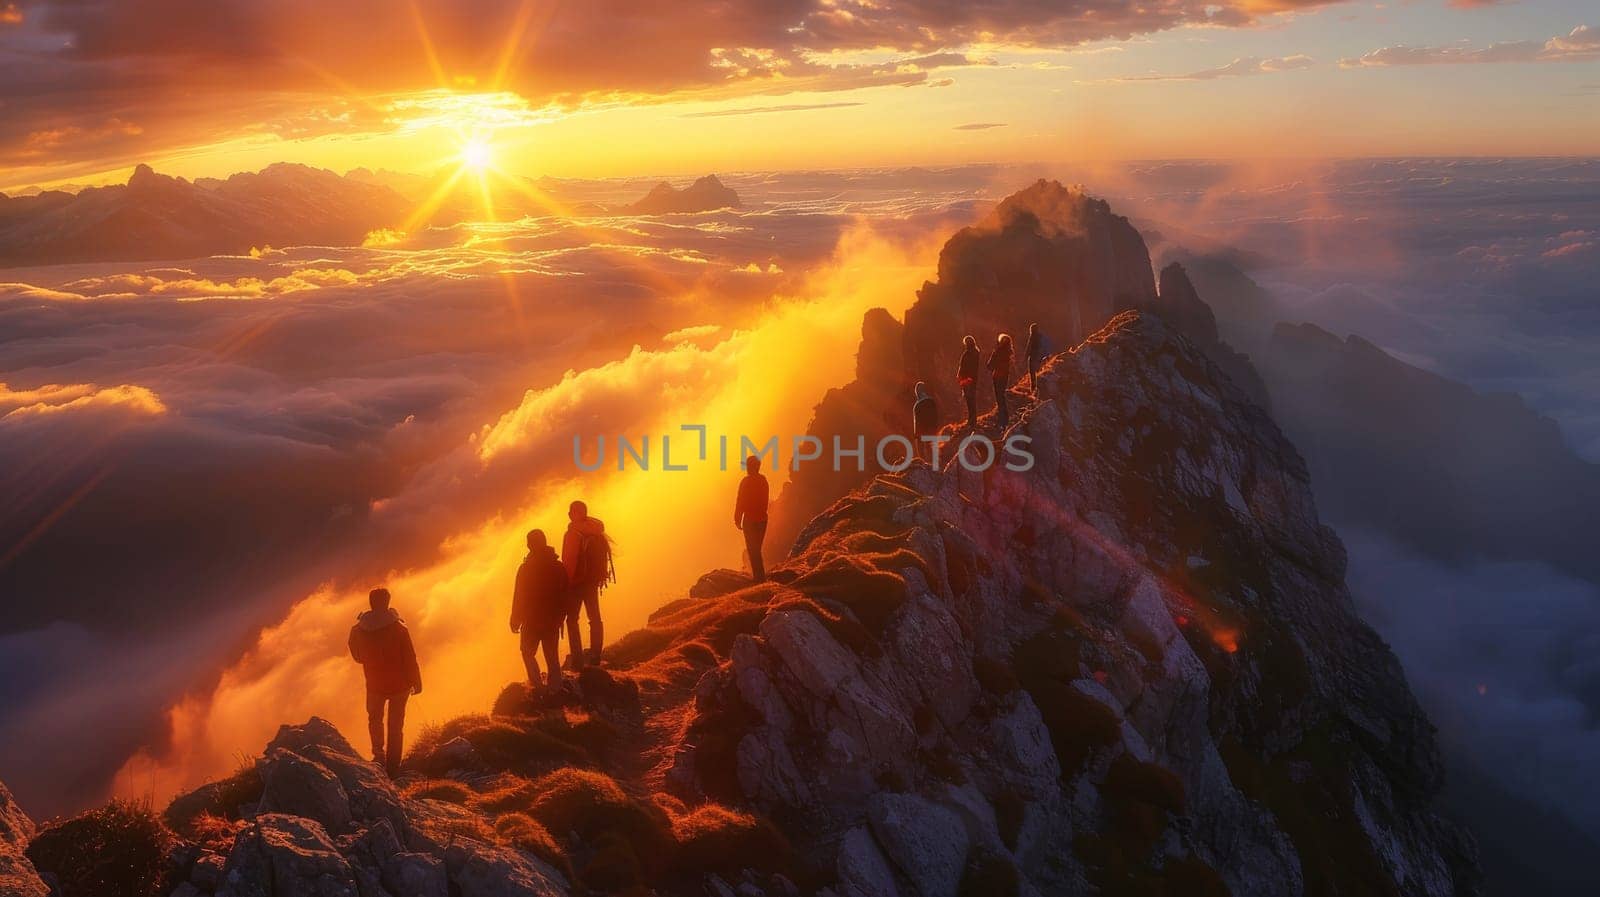 A group of people are standing on a mountain top, looking out at the beautiful sunset. The sky is filled with clouds and the sun is shining brightly, creating a warm and peaceful atmosphere